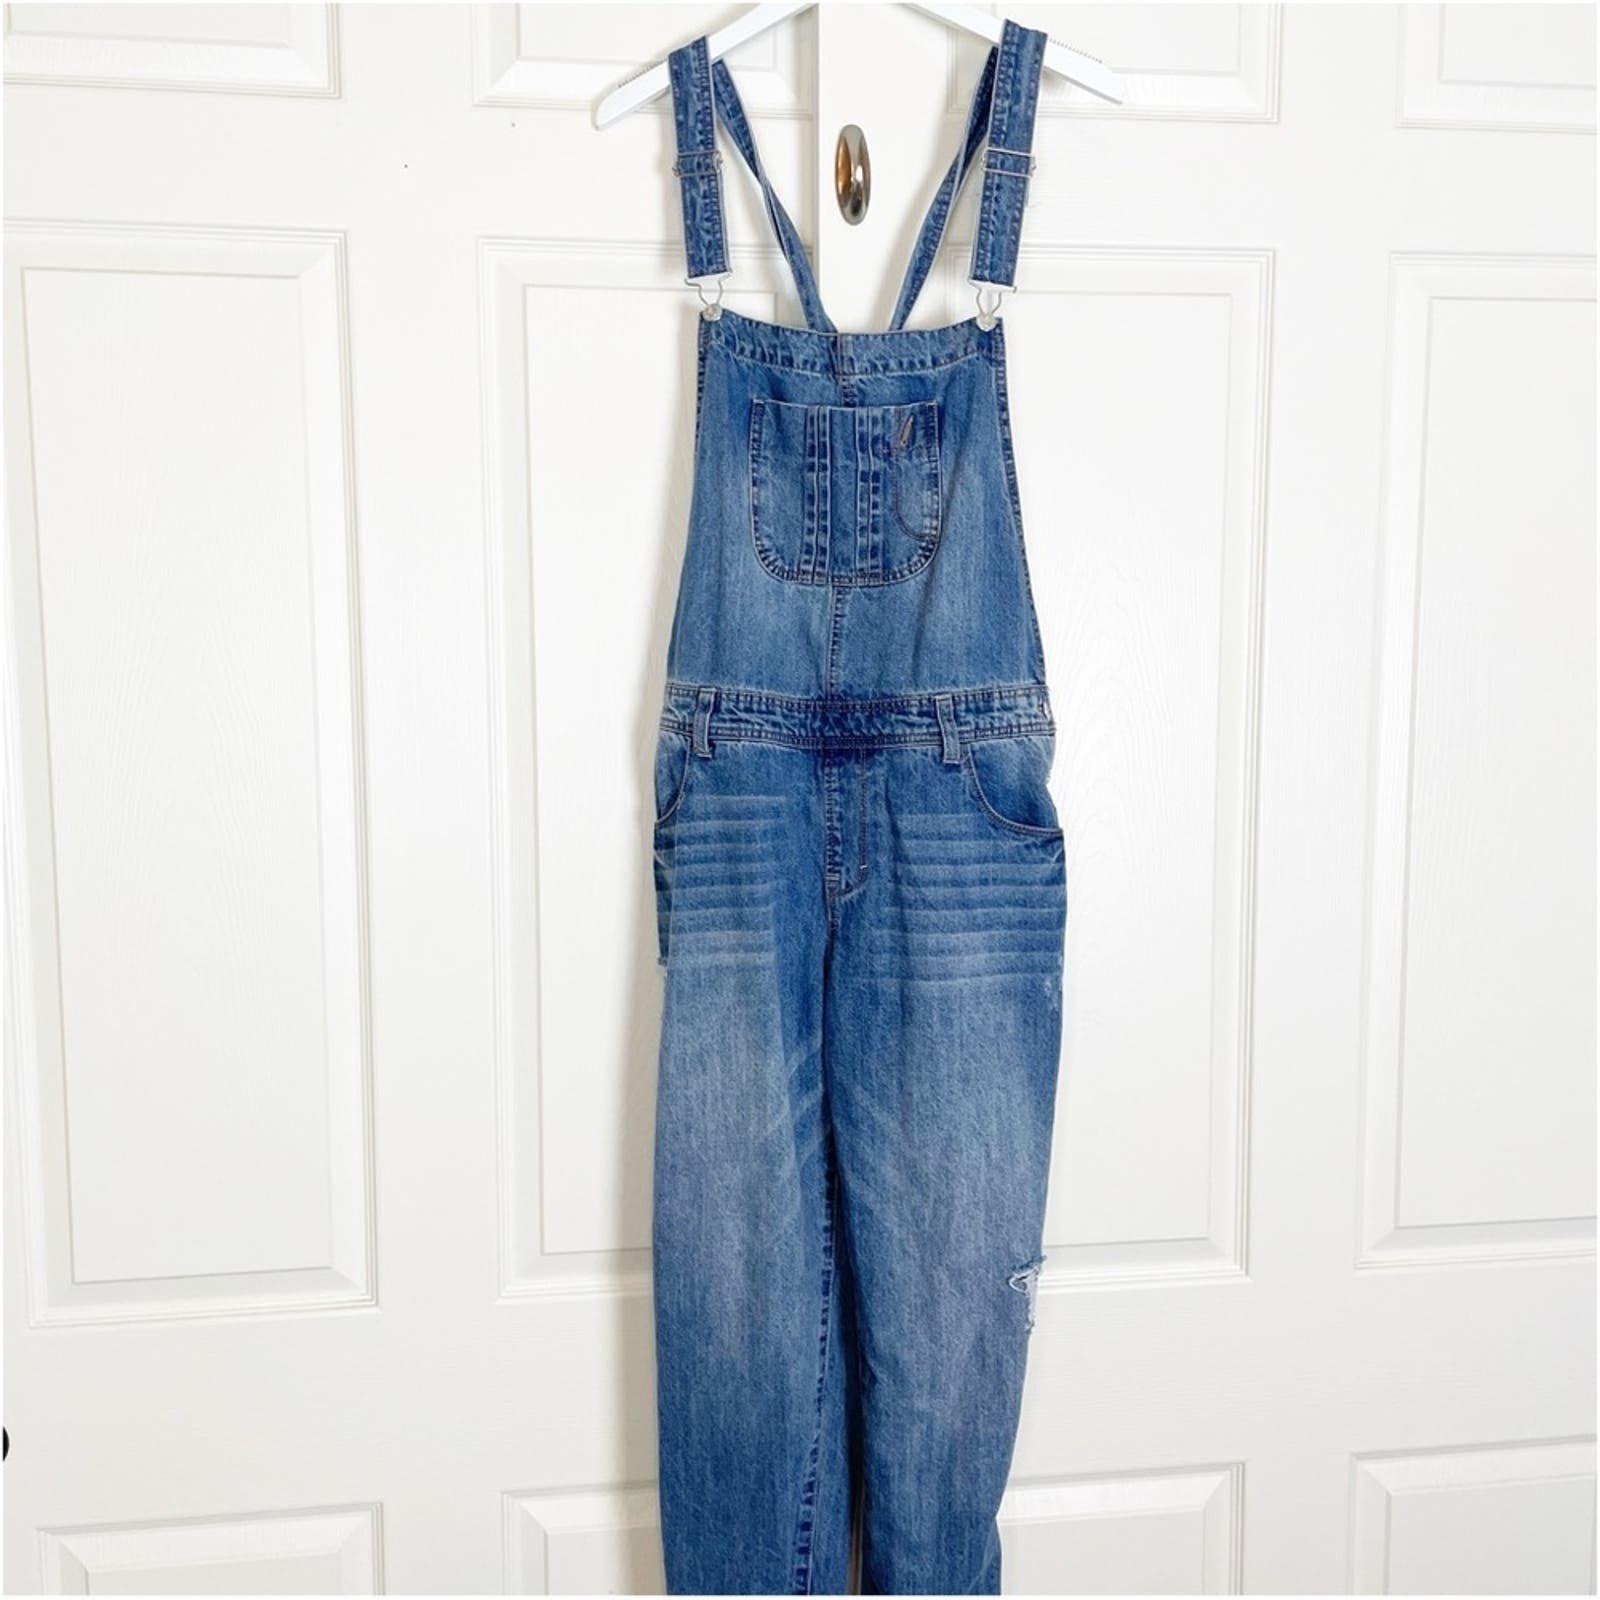 Affordable Kensie Distressed Denim Overalls iSQc7A326 Outlet Store